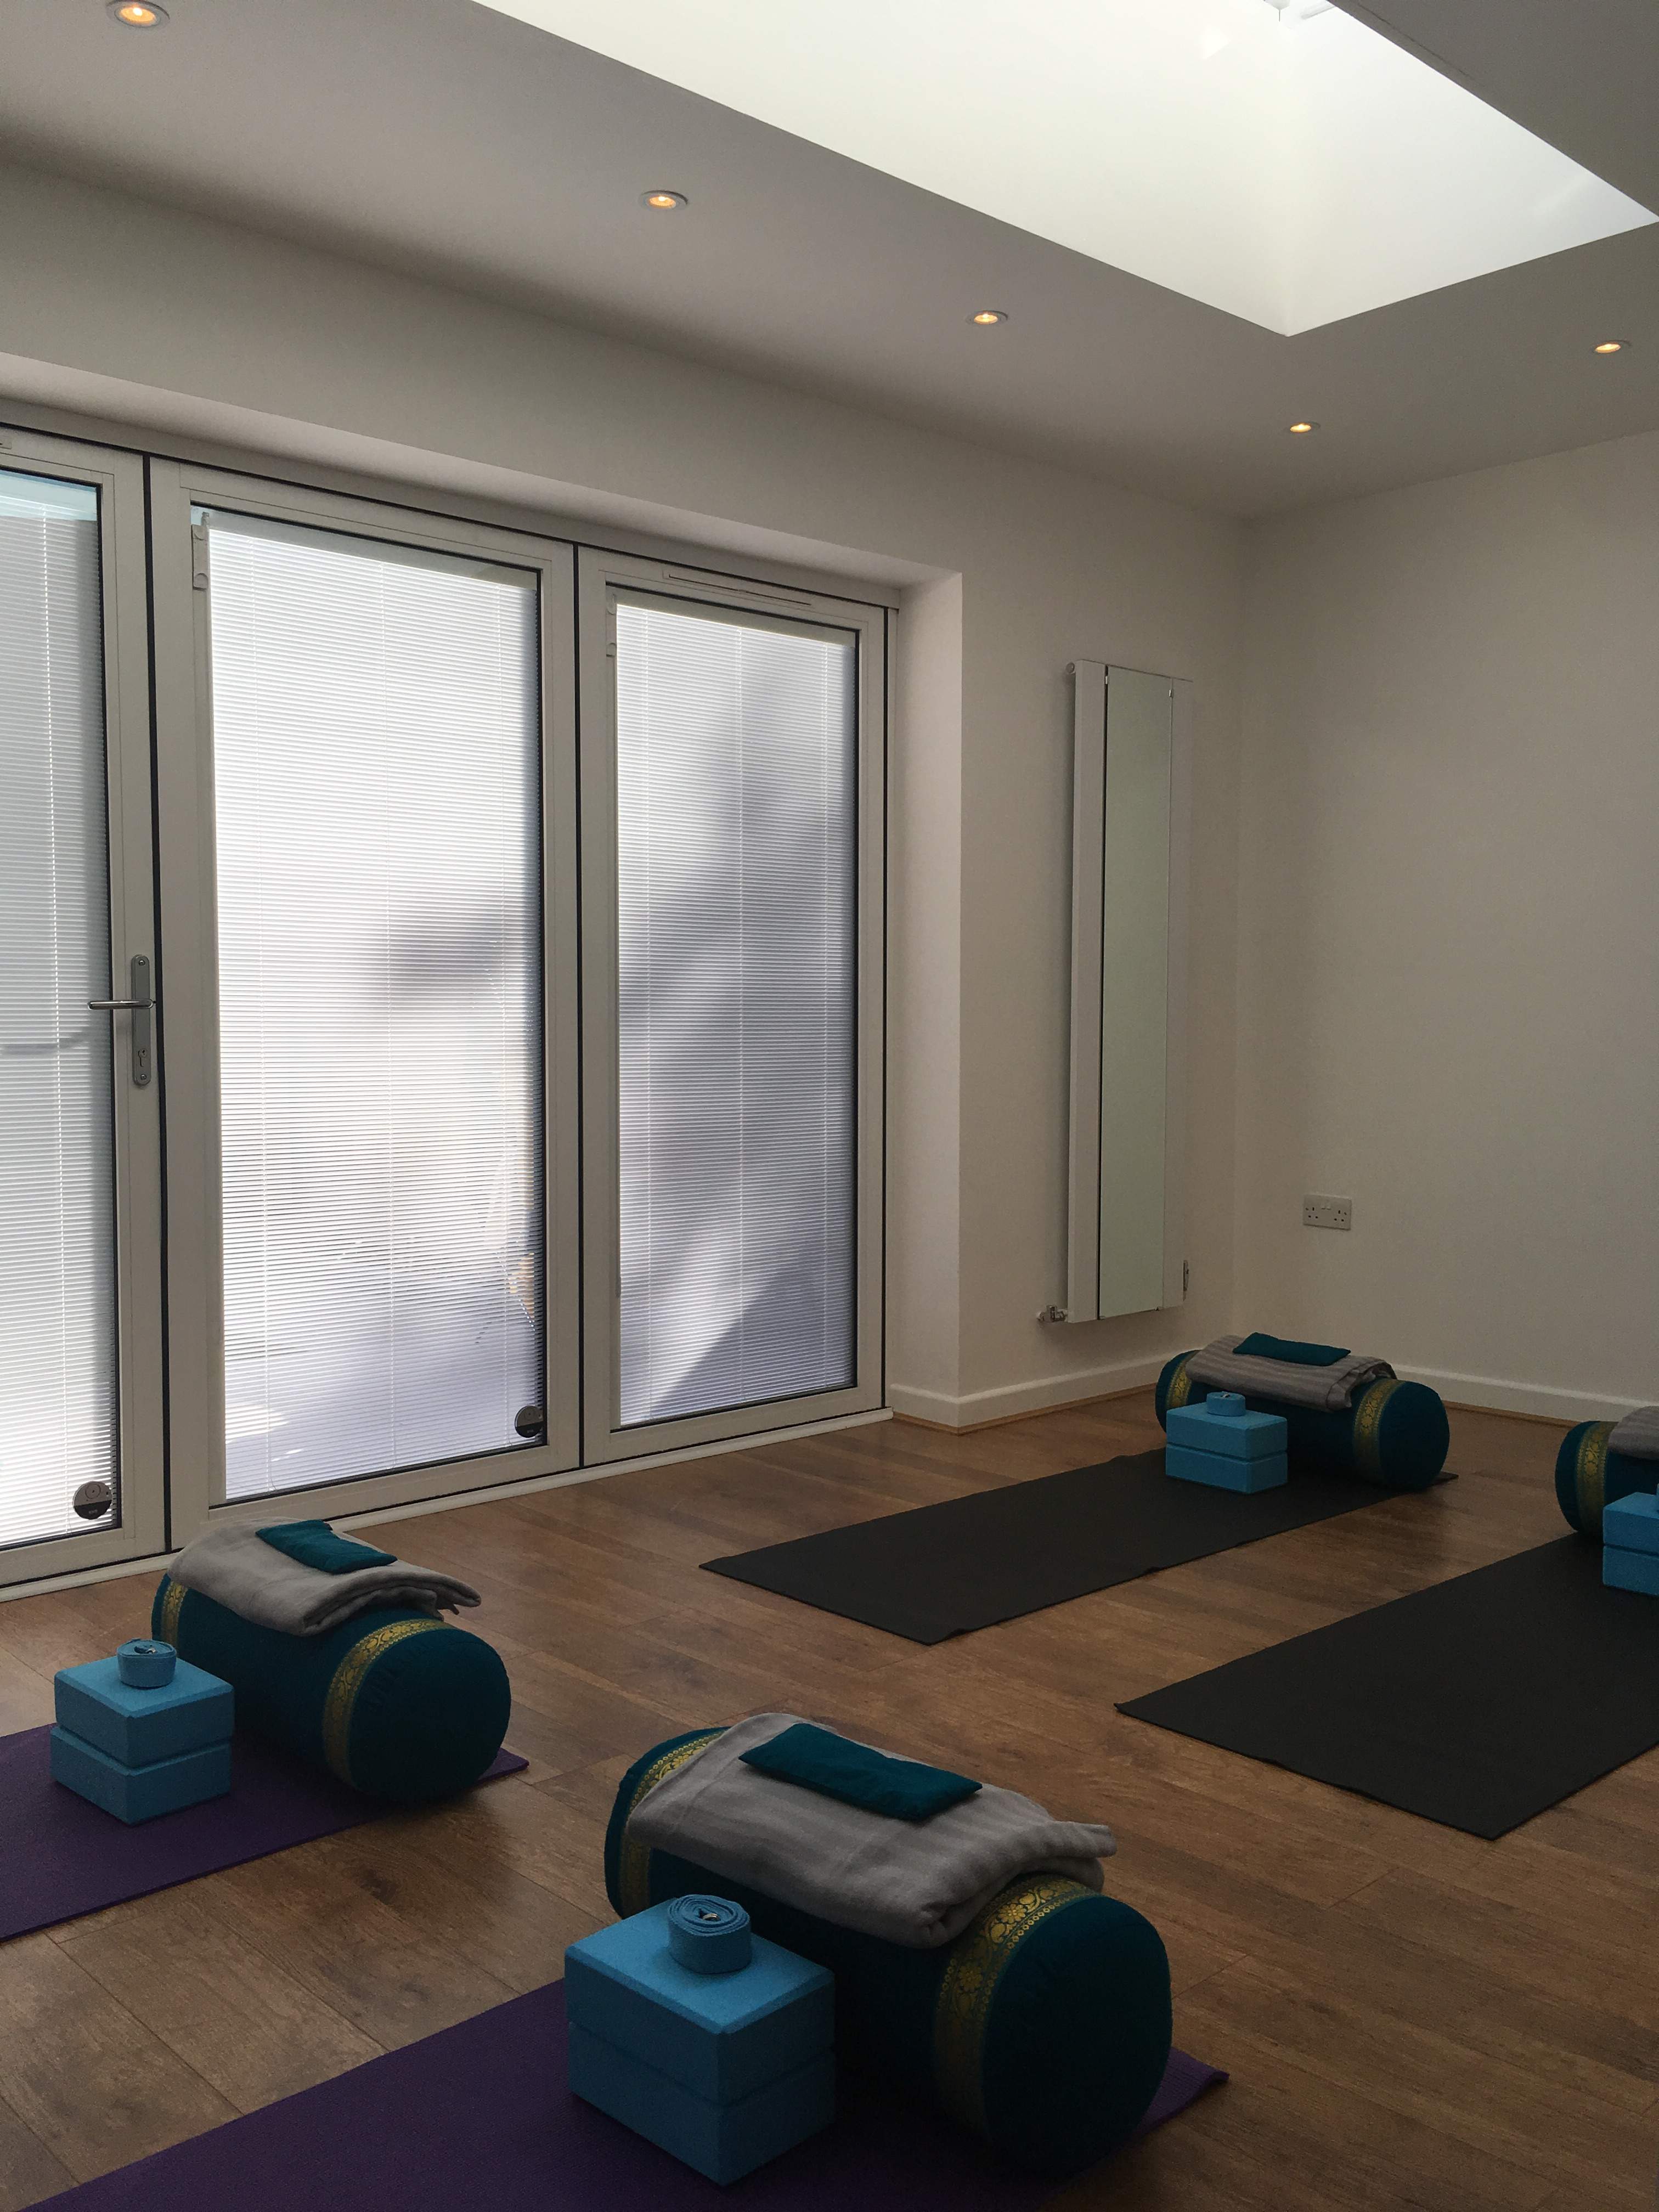 Yoga Mind Balance offers yoga classes, 1-1 Private Yoga sessions and Workshops, South Woodford E18.